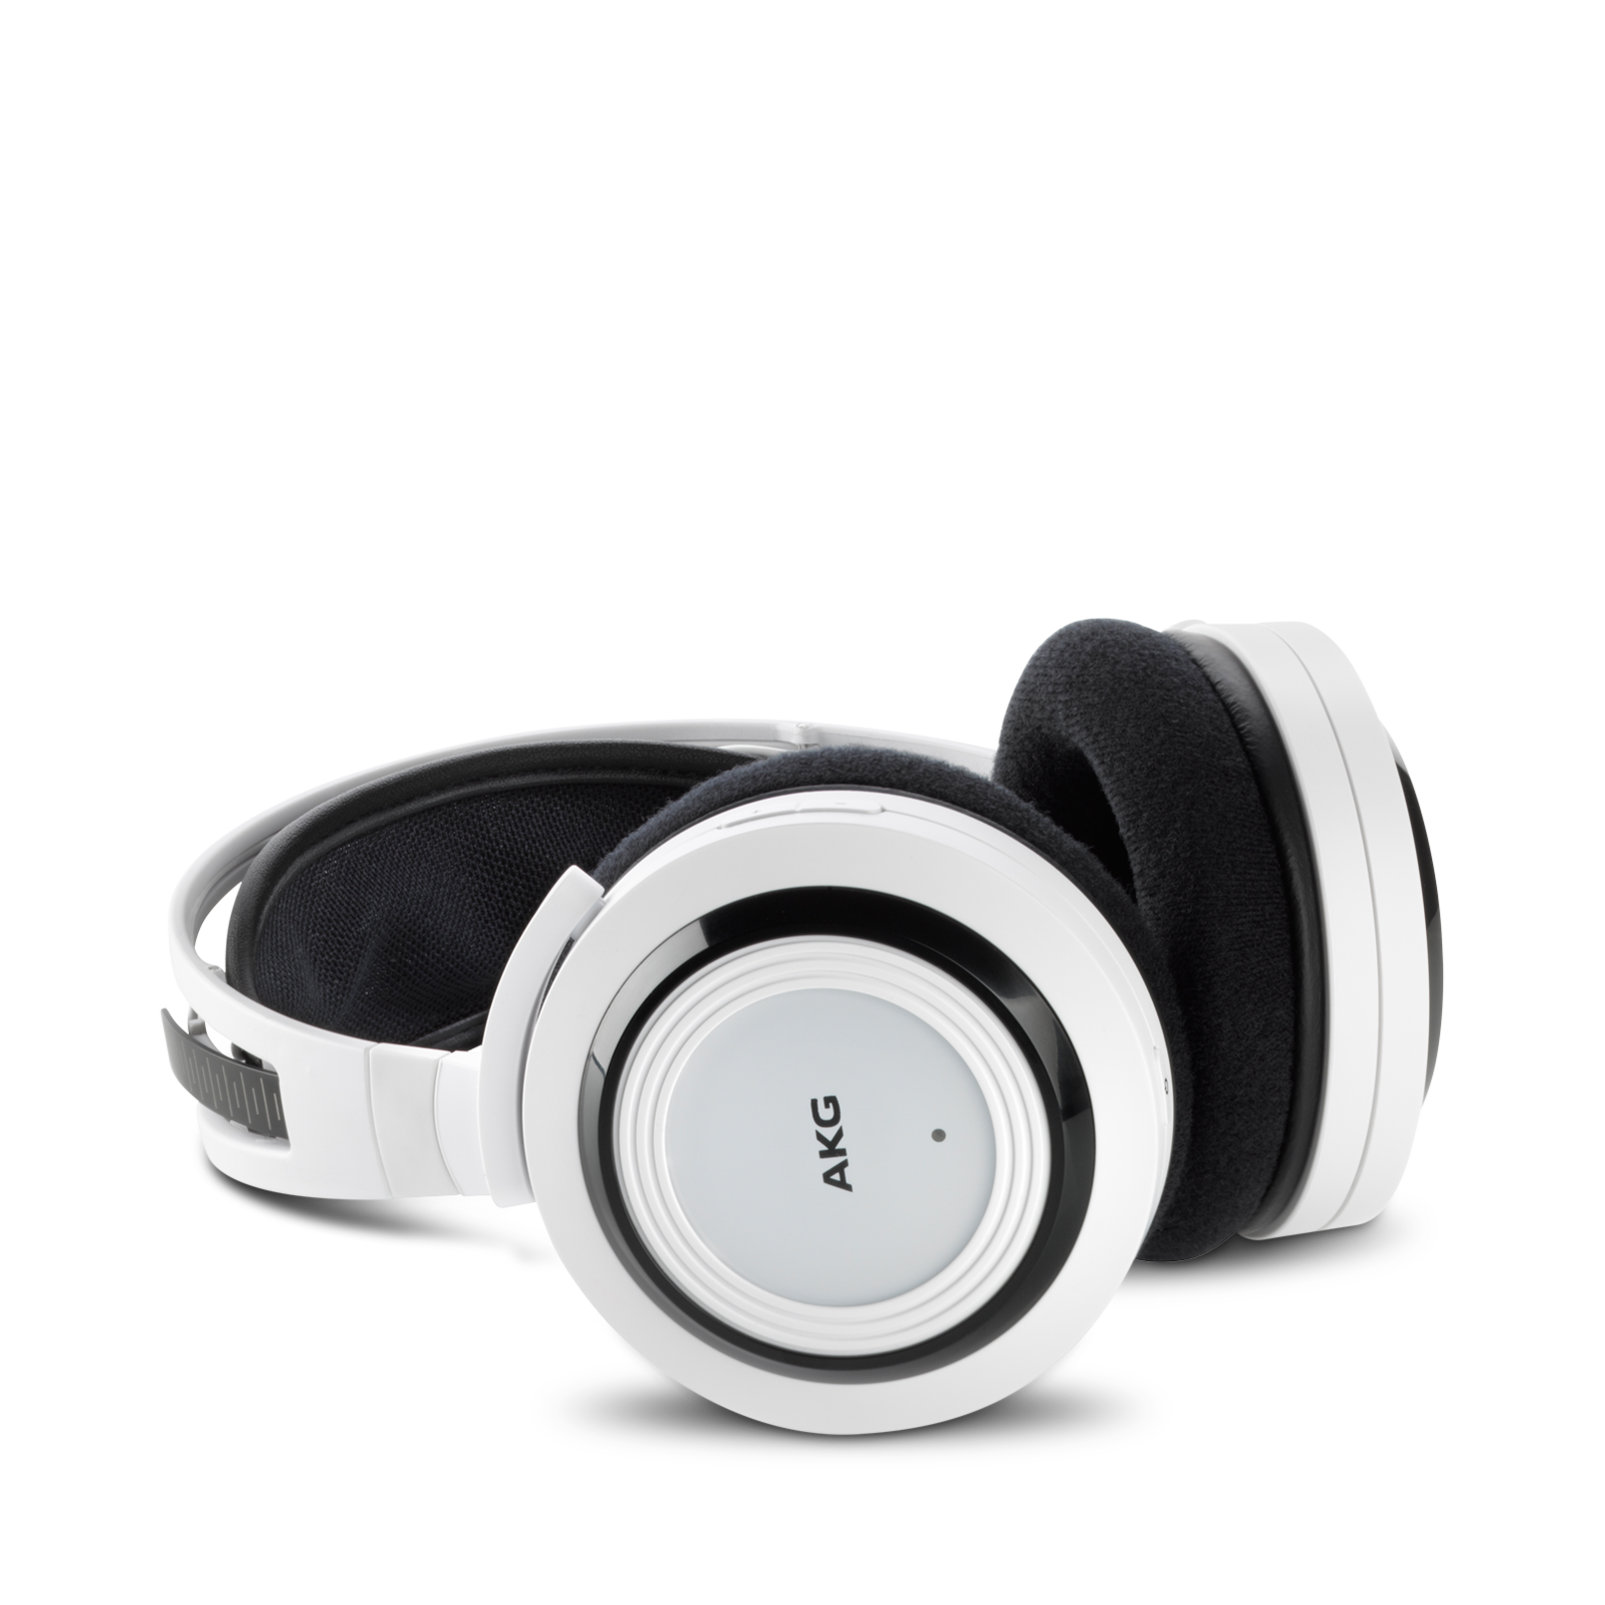 K 935 - White - High performance digital wireless stereo headphone optimized for movies, games and music - Hero